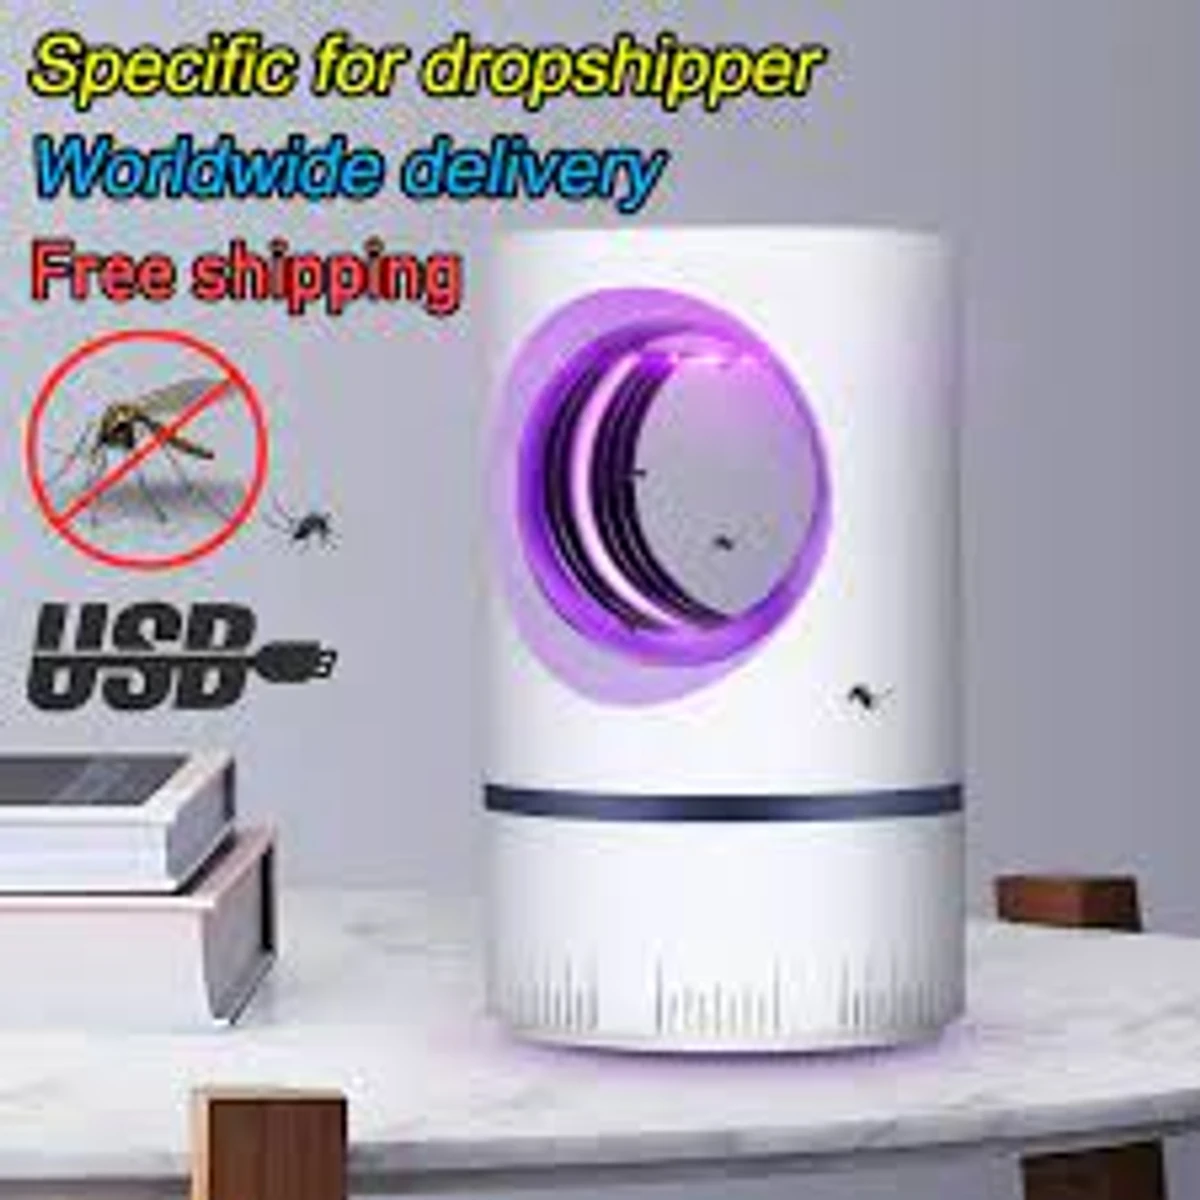 USB Powered Mosquito & Insect Killer